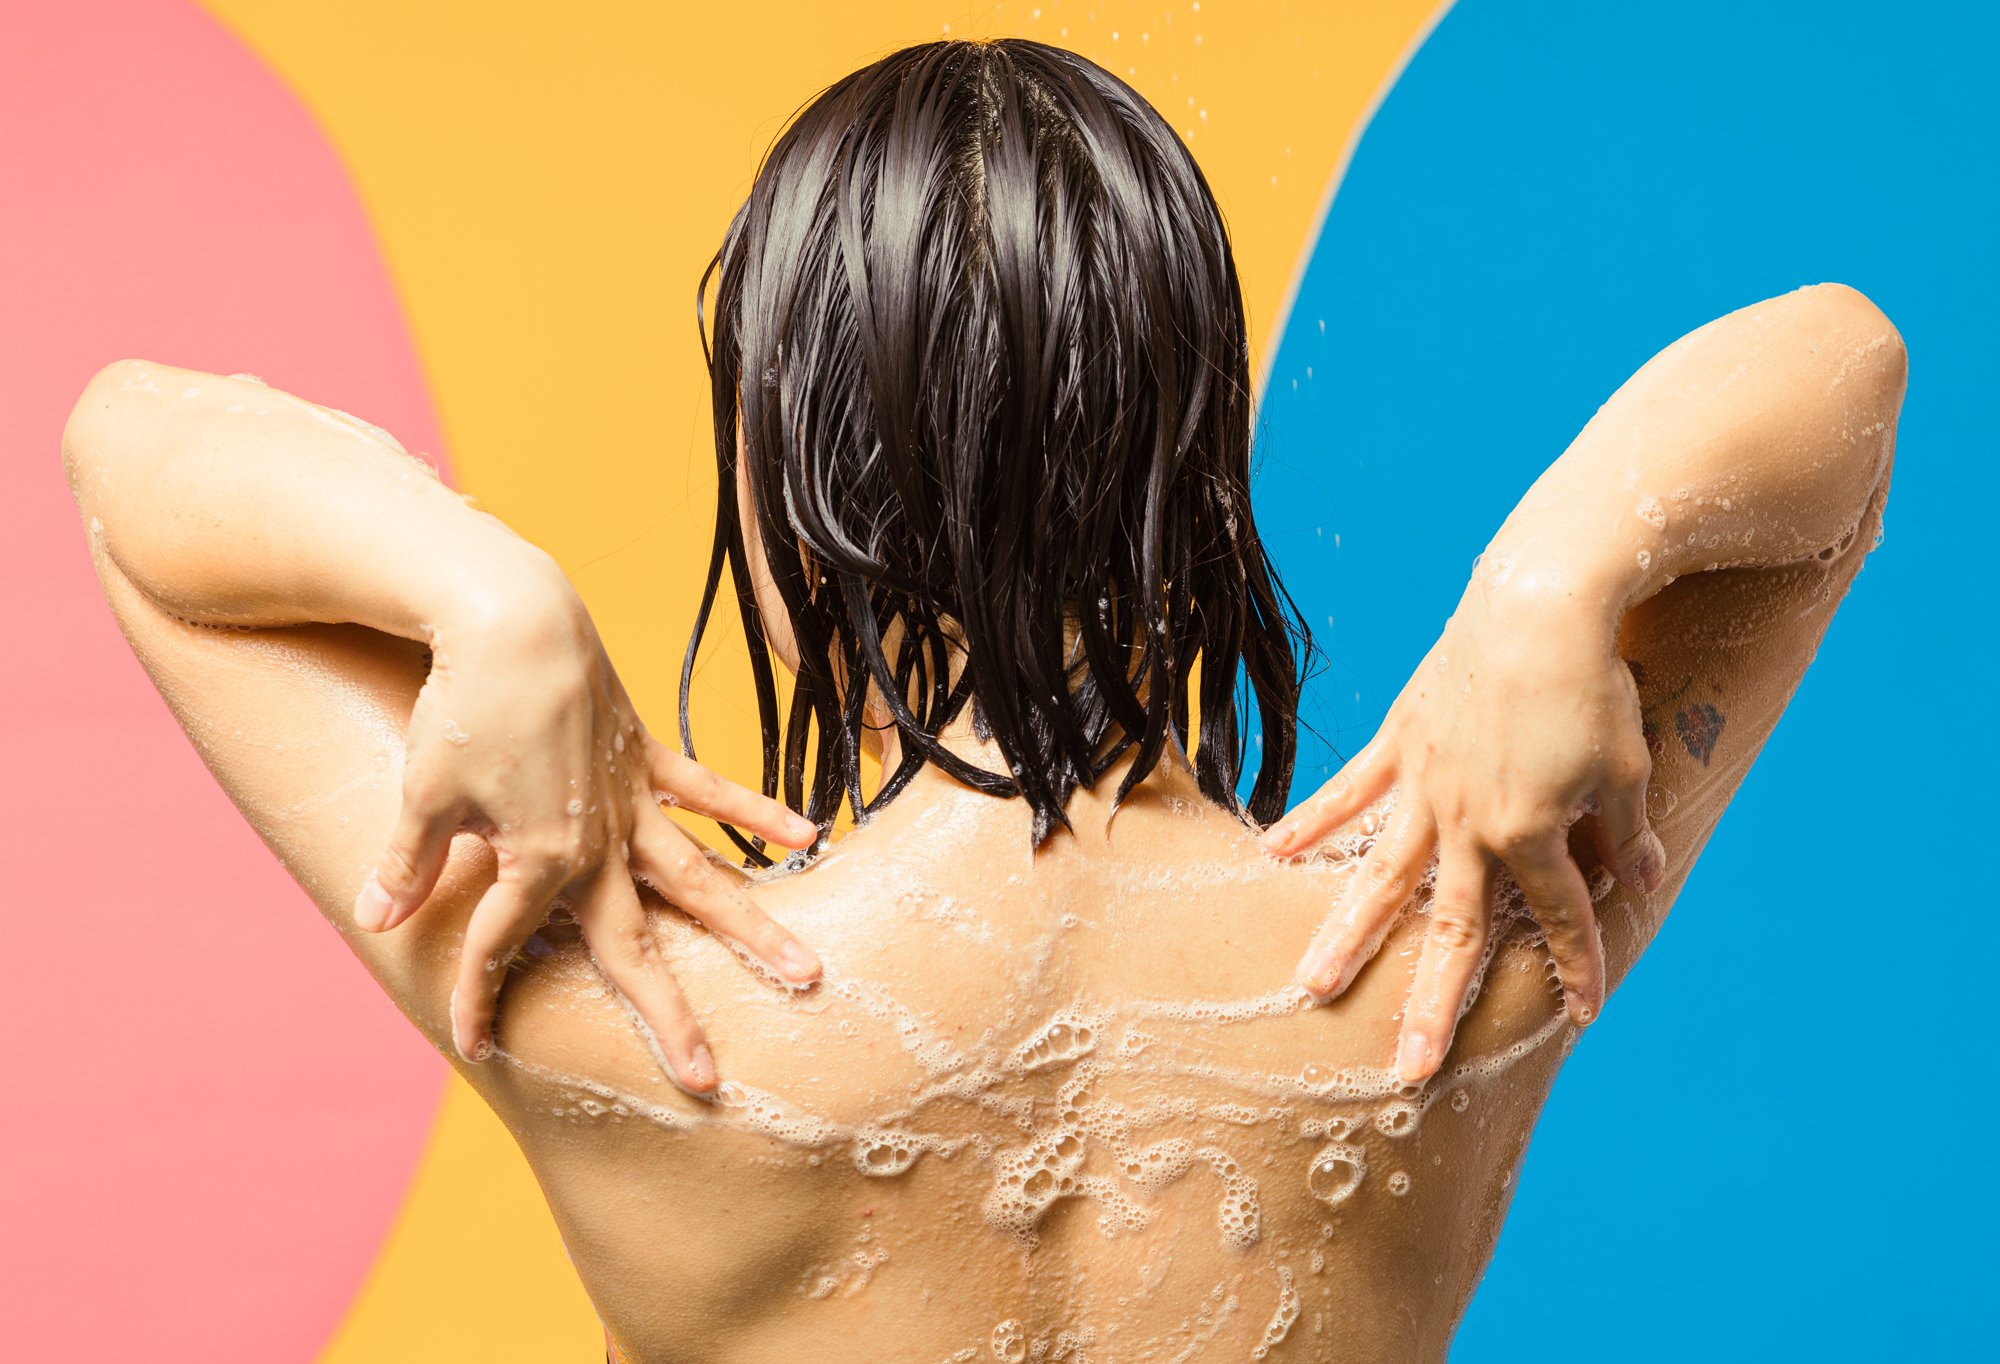 A model is shown massaging shower gel across their back and shoulders, creating light white foam and bubbles.